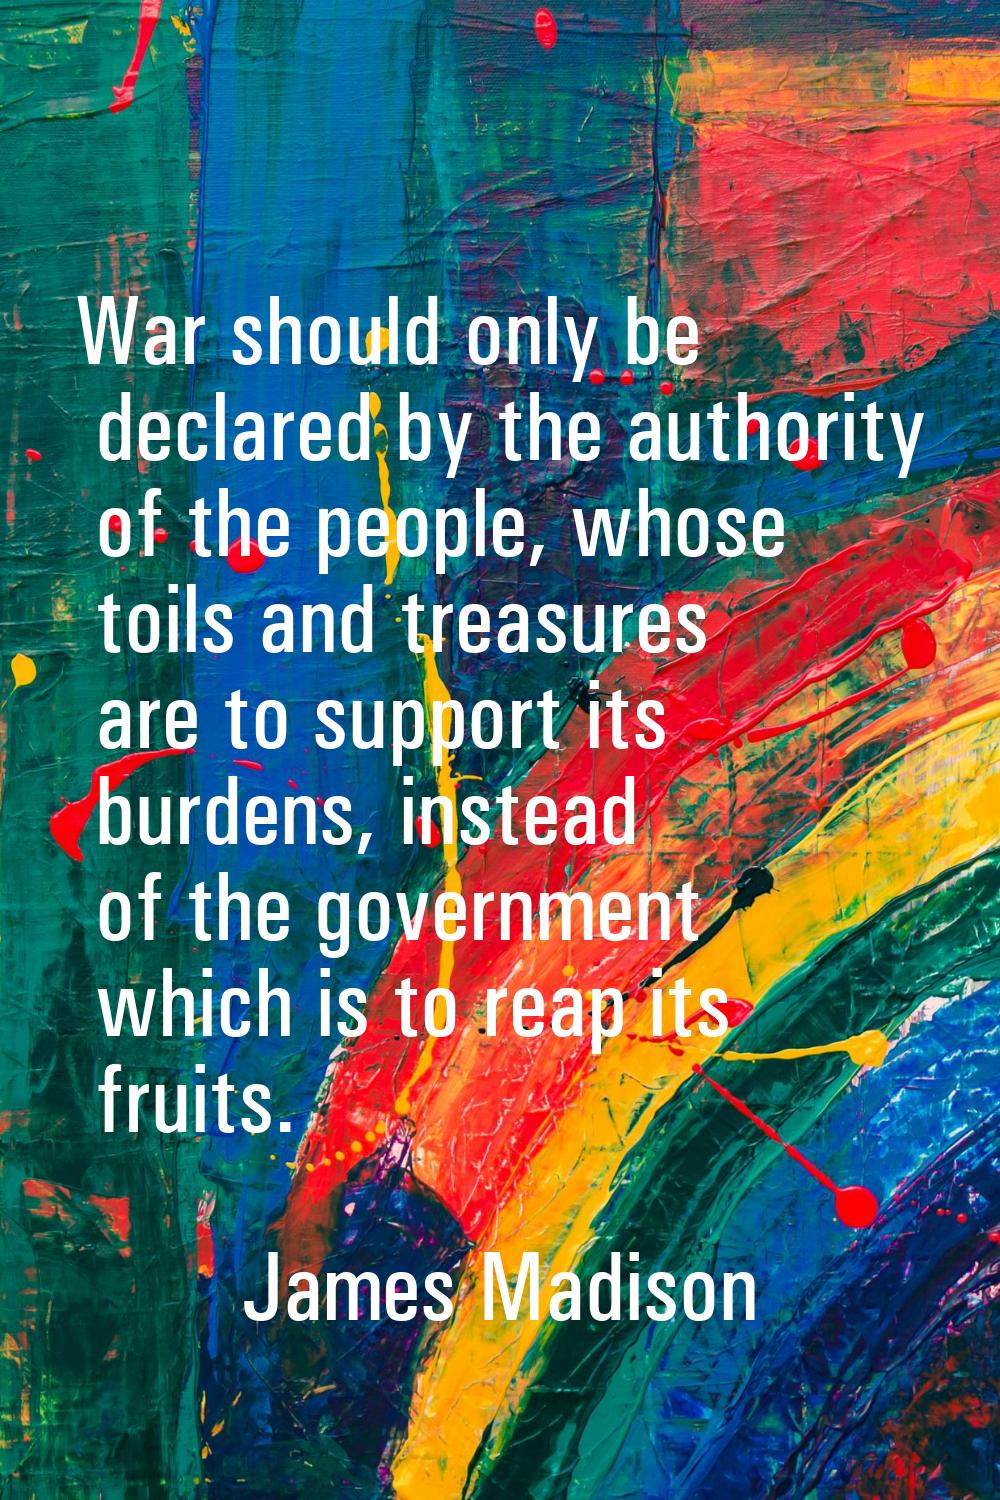 War should only be declared by the authority of the people, whose toils and treasures are to suppor